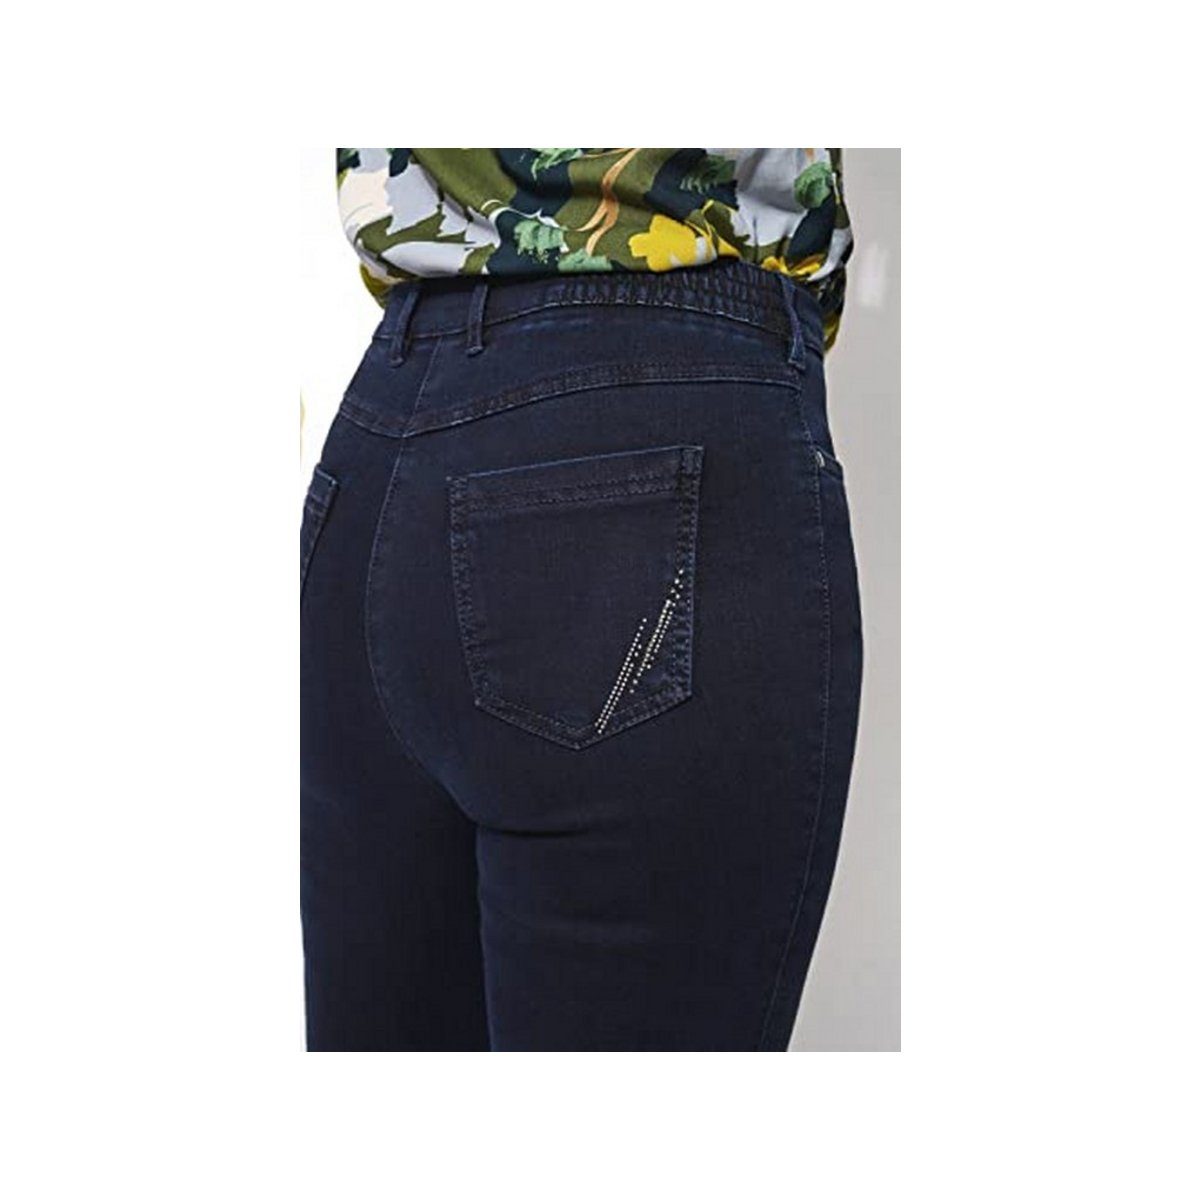 Relaxed (1-tlg) 5-Pocket-Jeans TONI kombi by